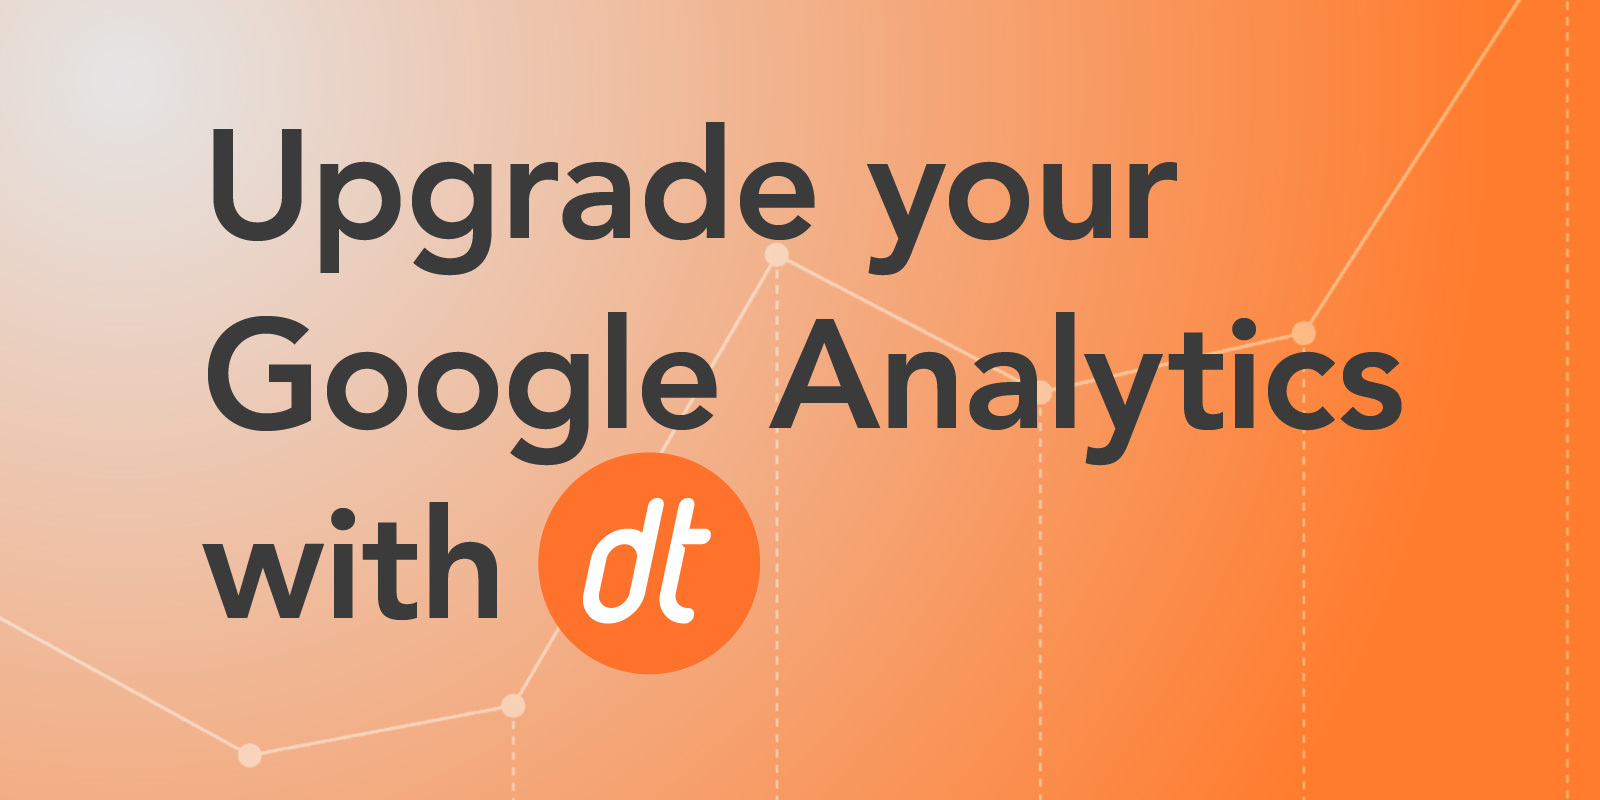 Upgrade your Google Analytics with DT